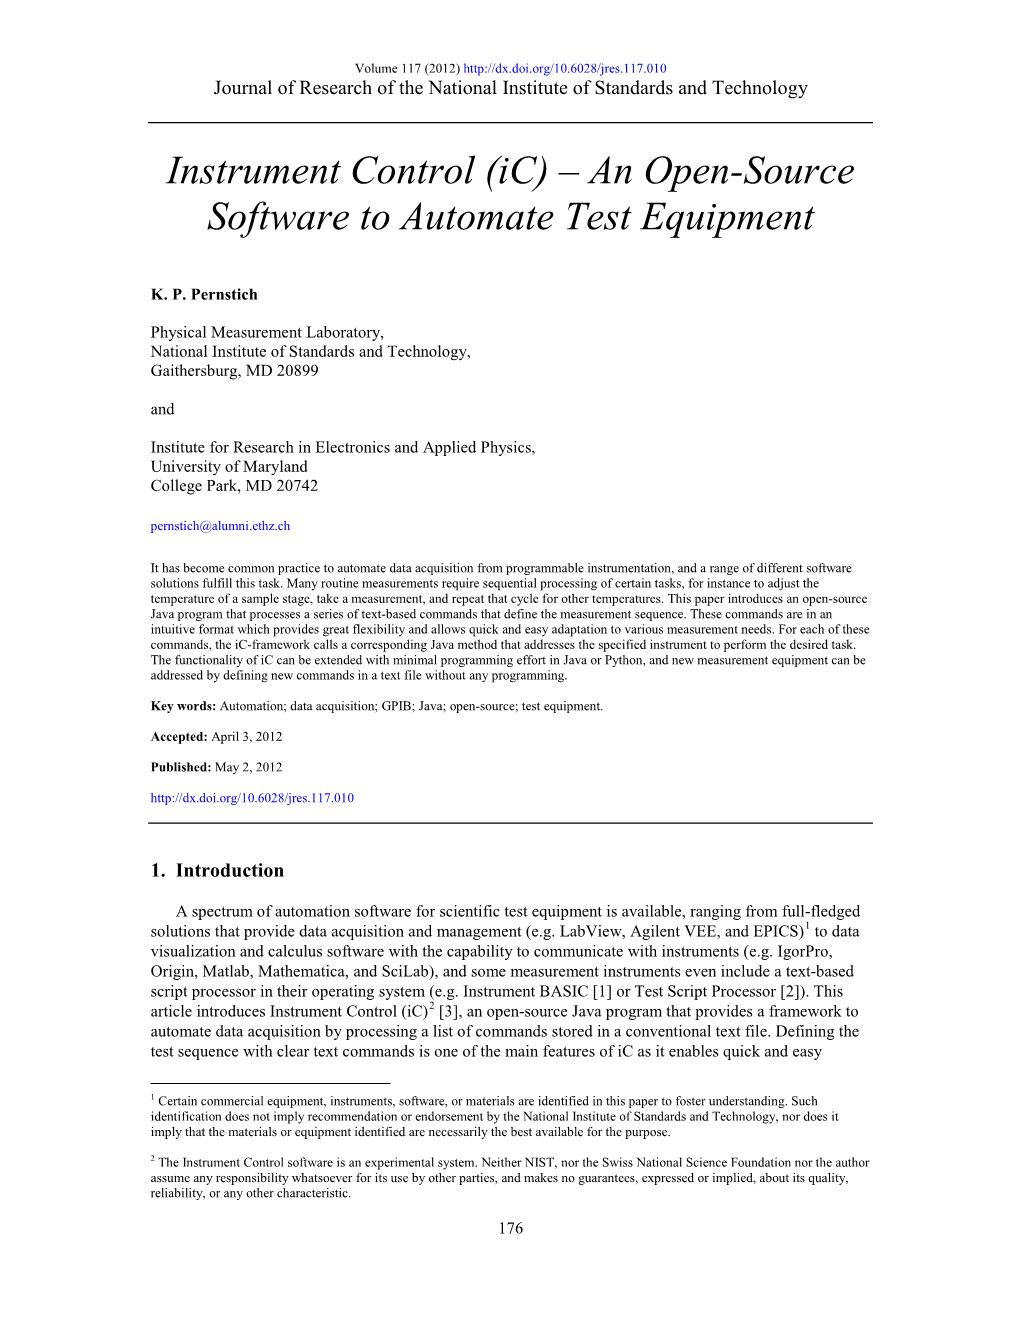 Instrument Control (Ic) – an Open-Source Software to Automate Test Equipment